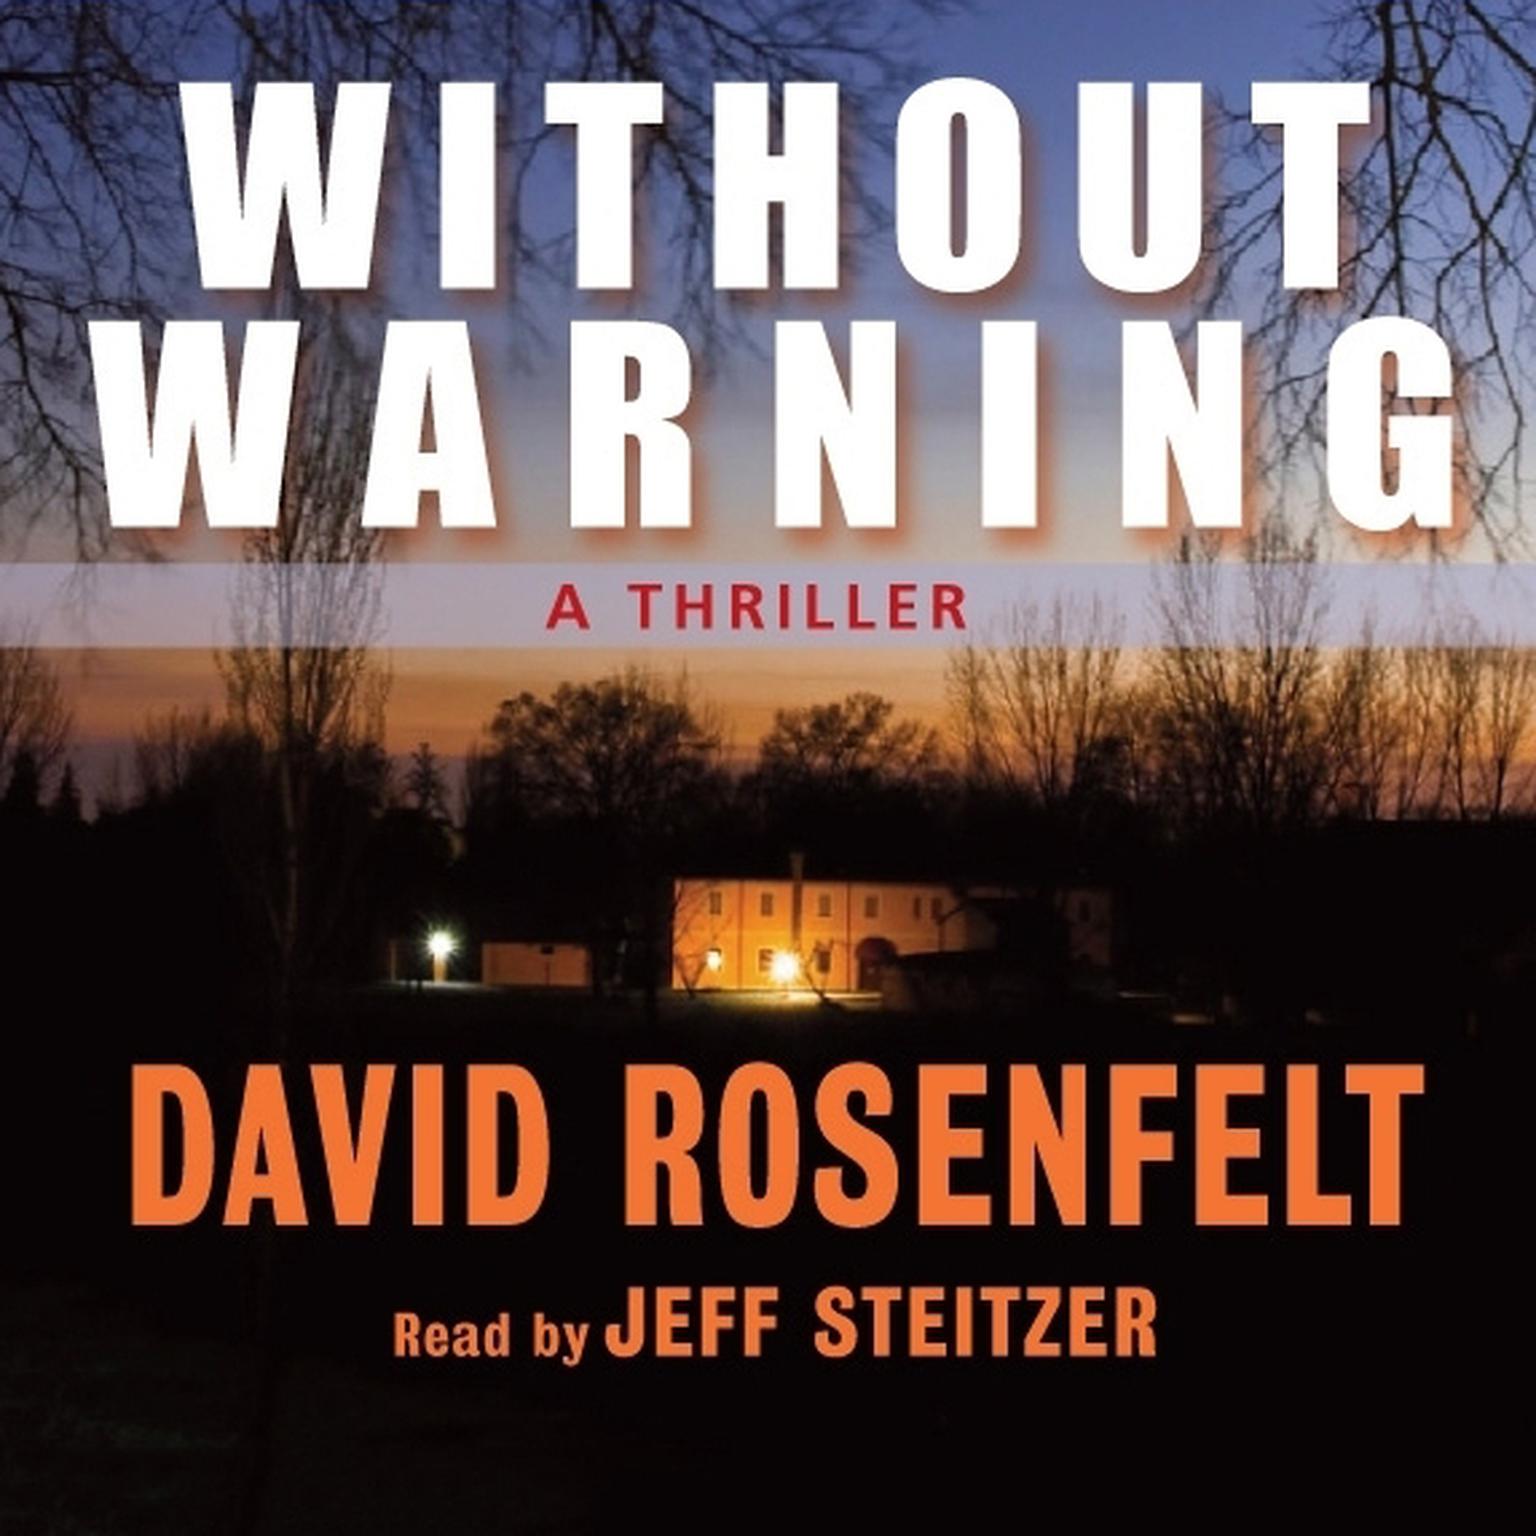 Without Warning Audiobook, by David Rosenfelt